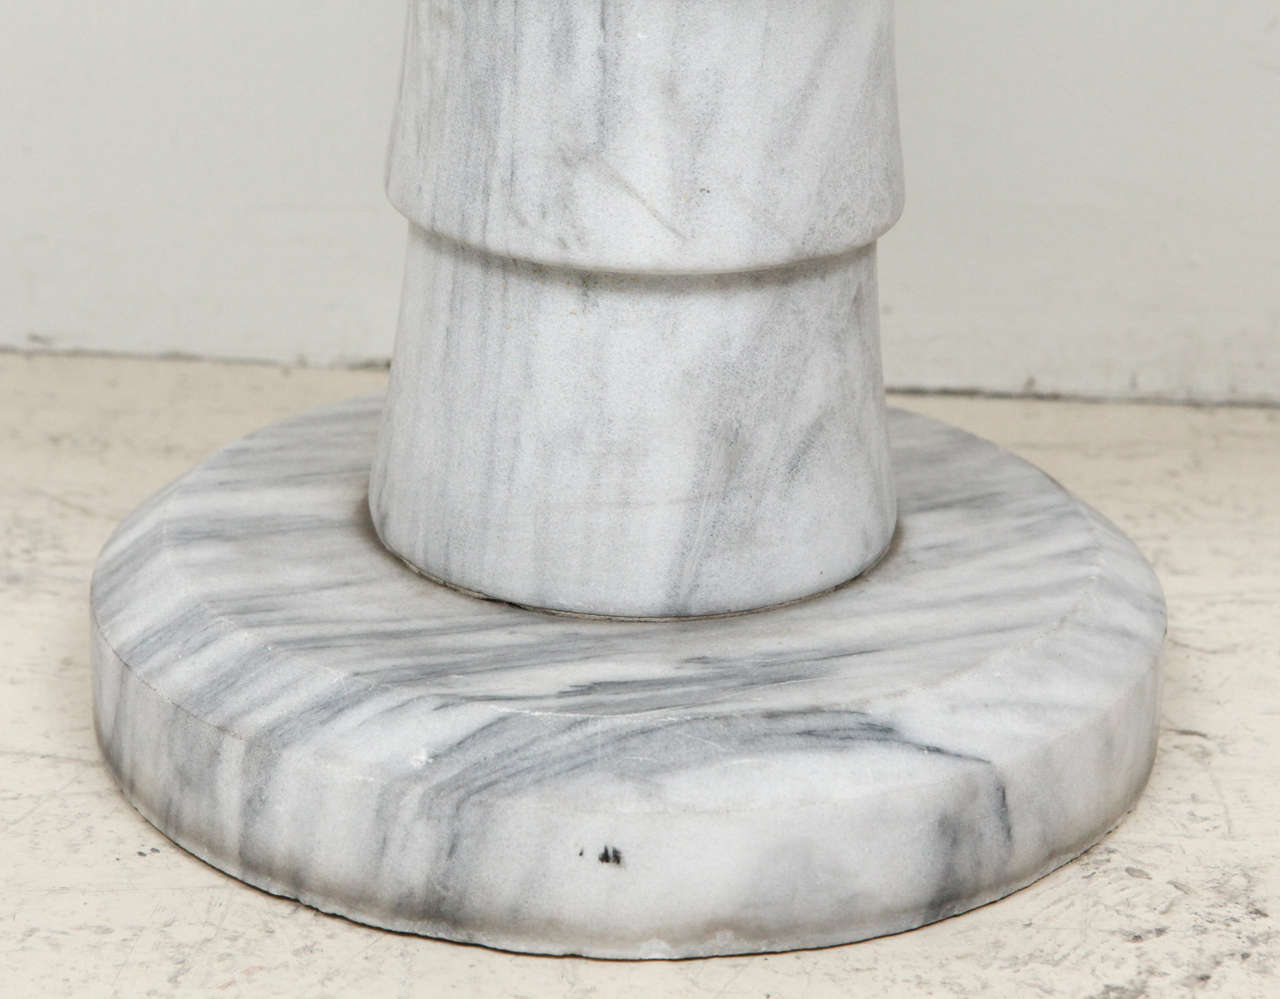 marble pedestal table